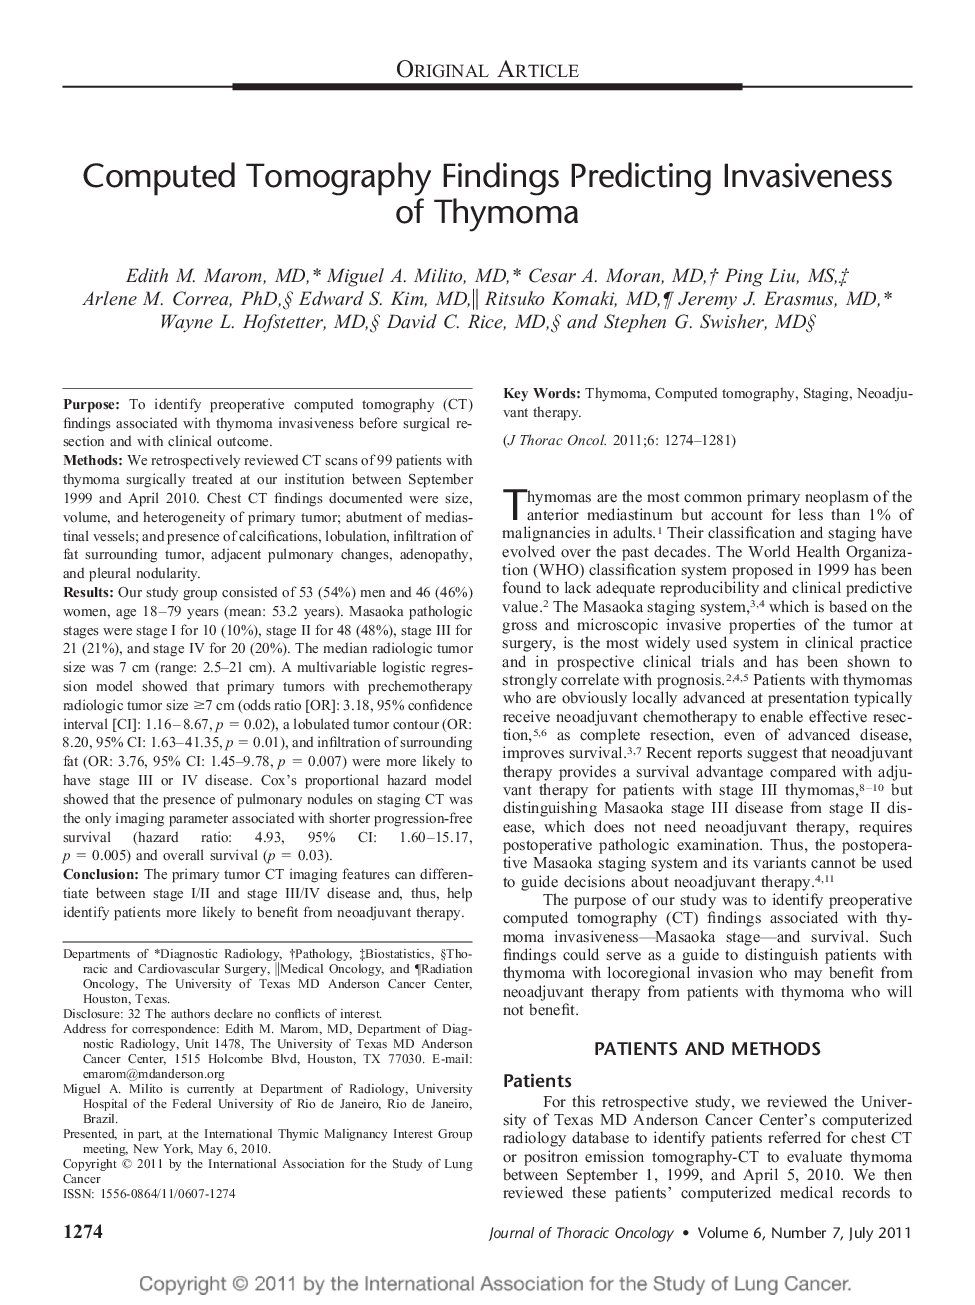 Computed Tomography Findings Predicting Invasiveness of Thymoma 